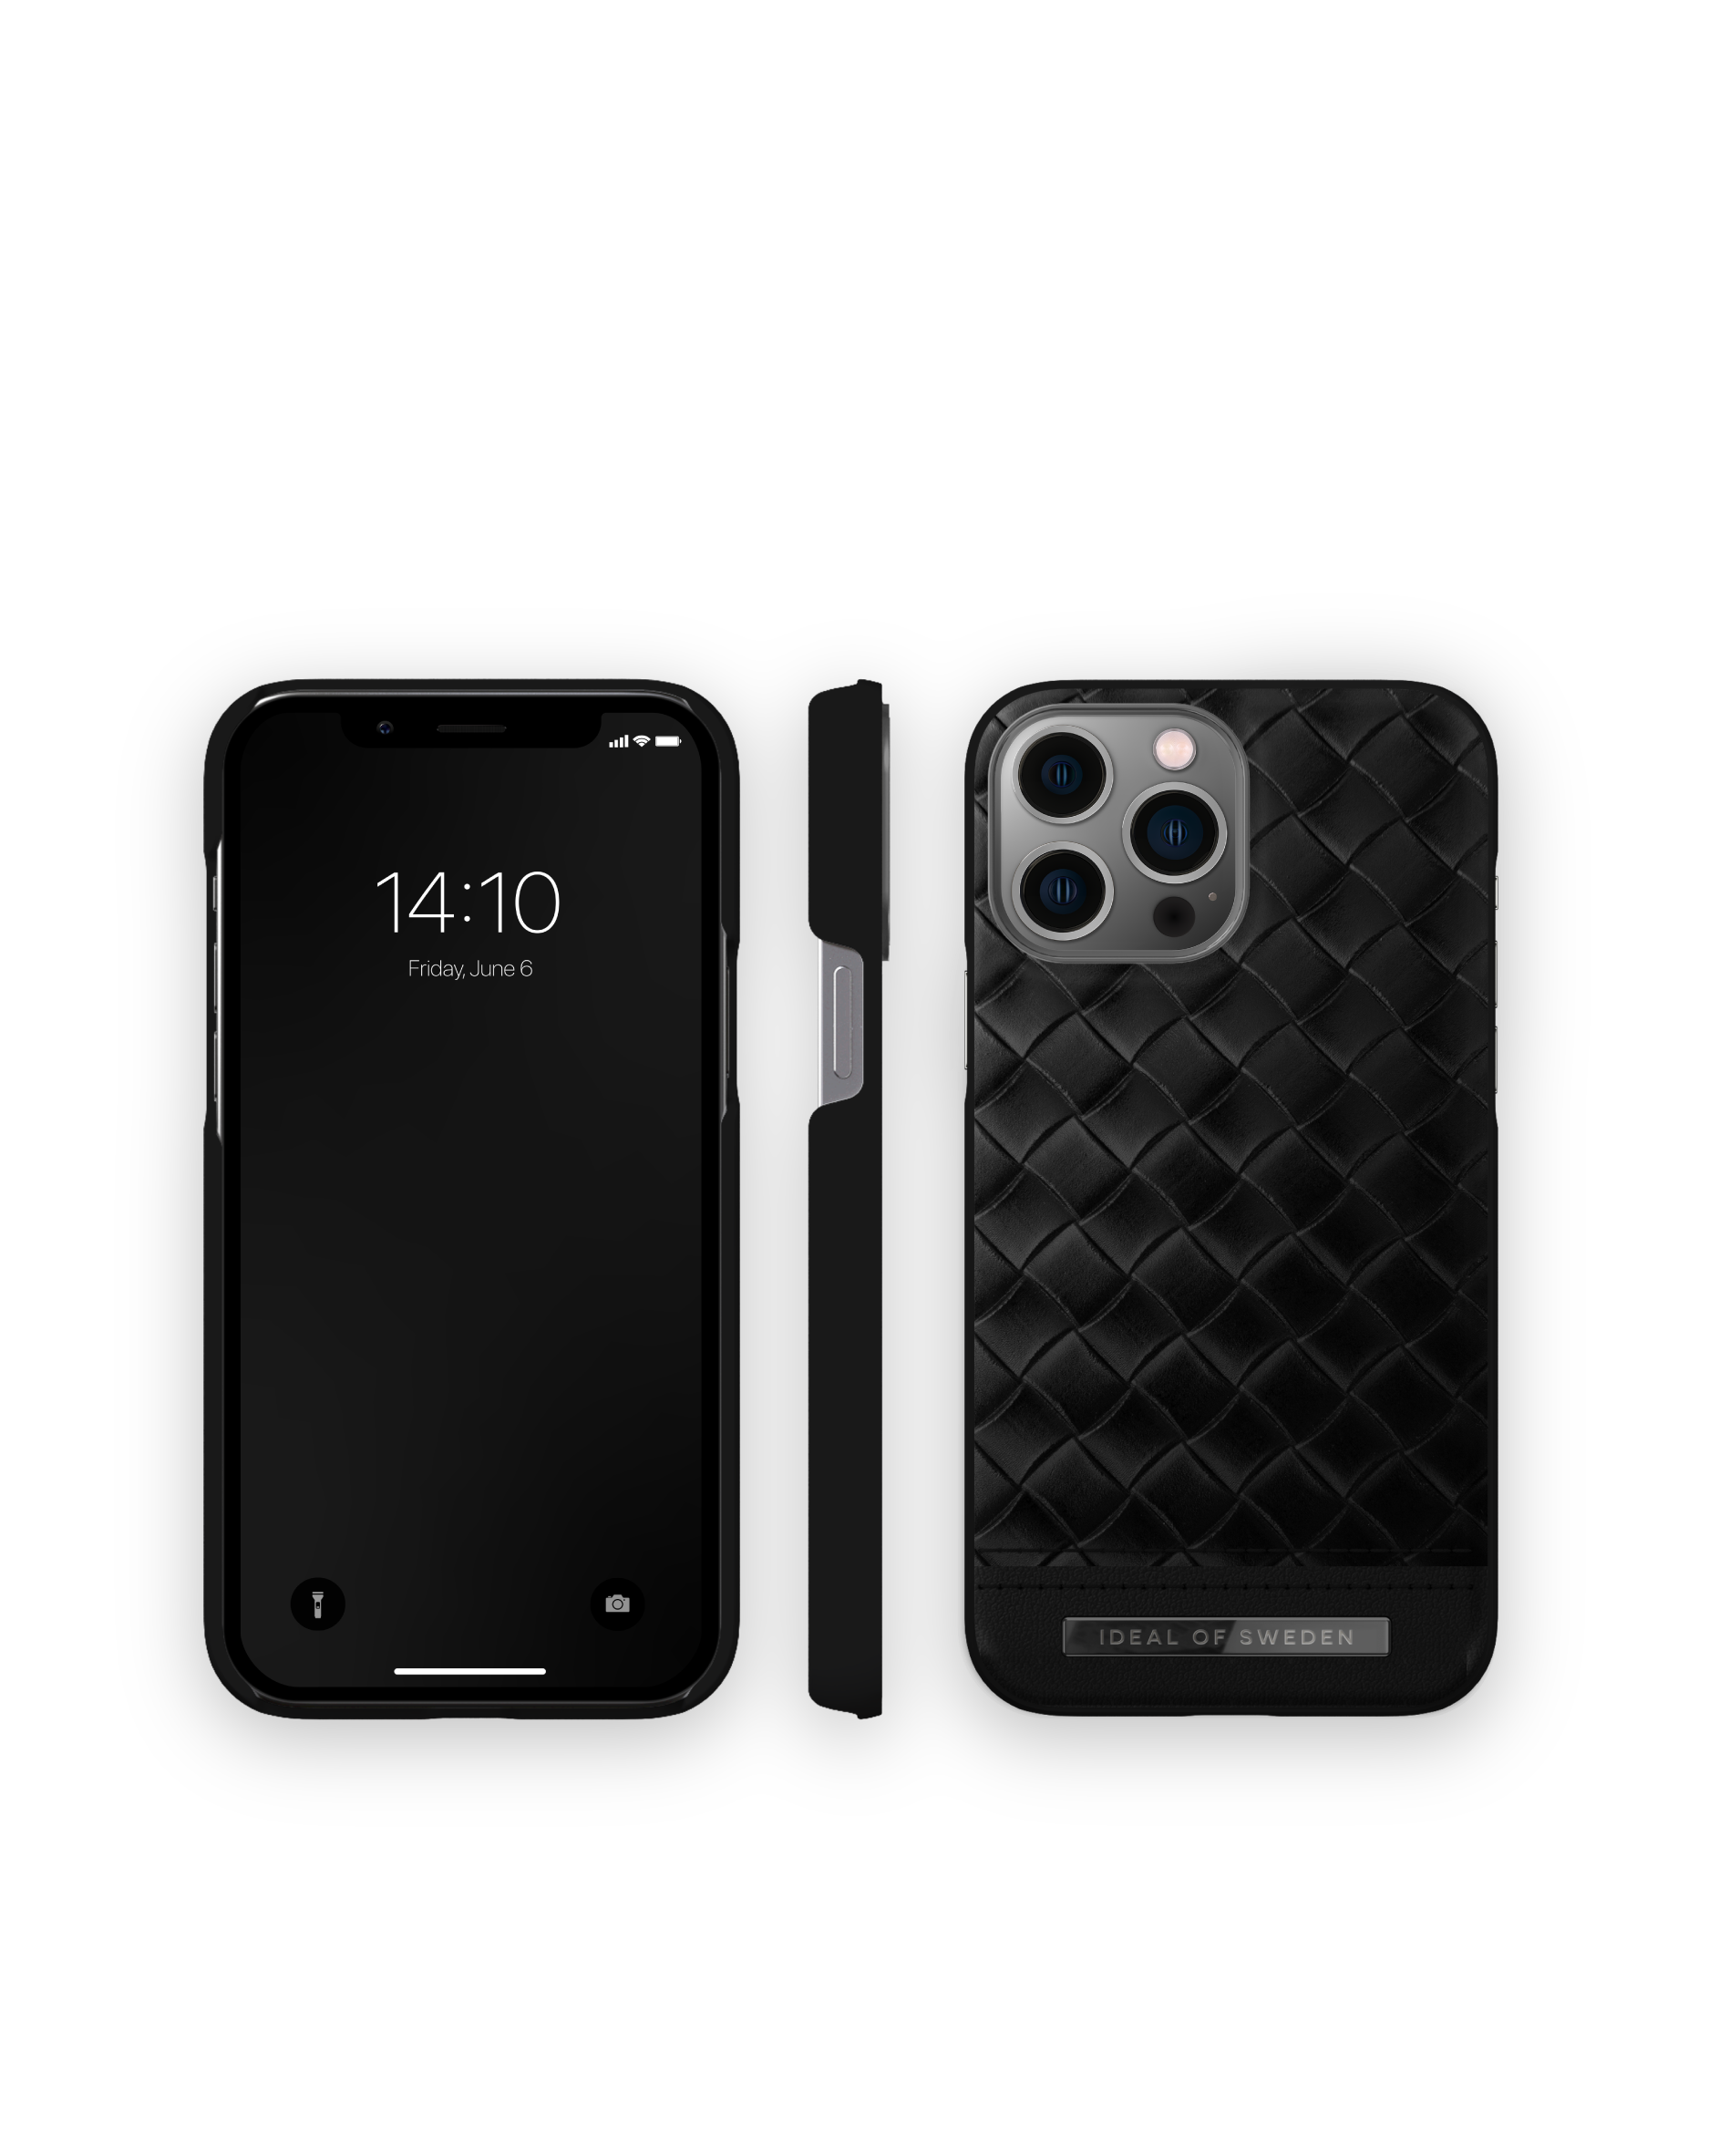 Pro Onyx IDEAL 13 SWEDEN Apple, IDACSS21-I2167-292, Black Backcover, iPhone OF Max,